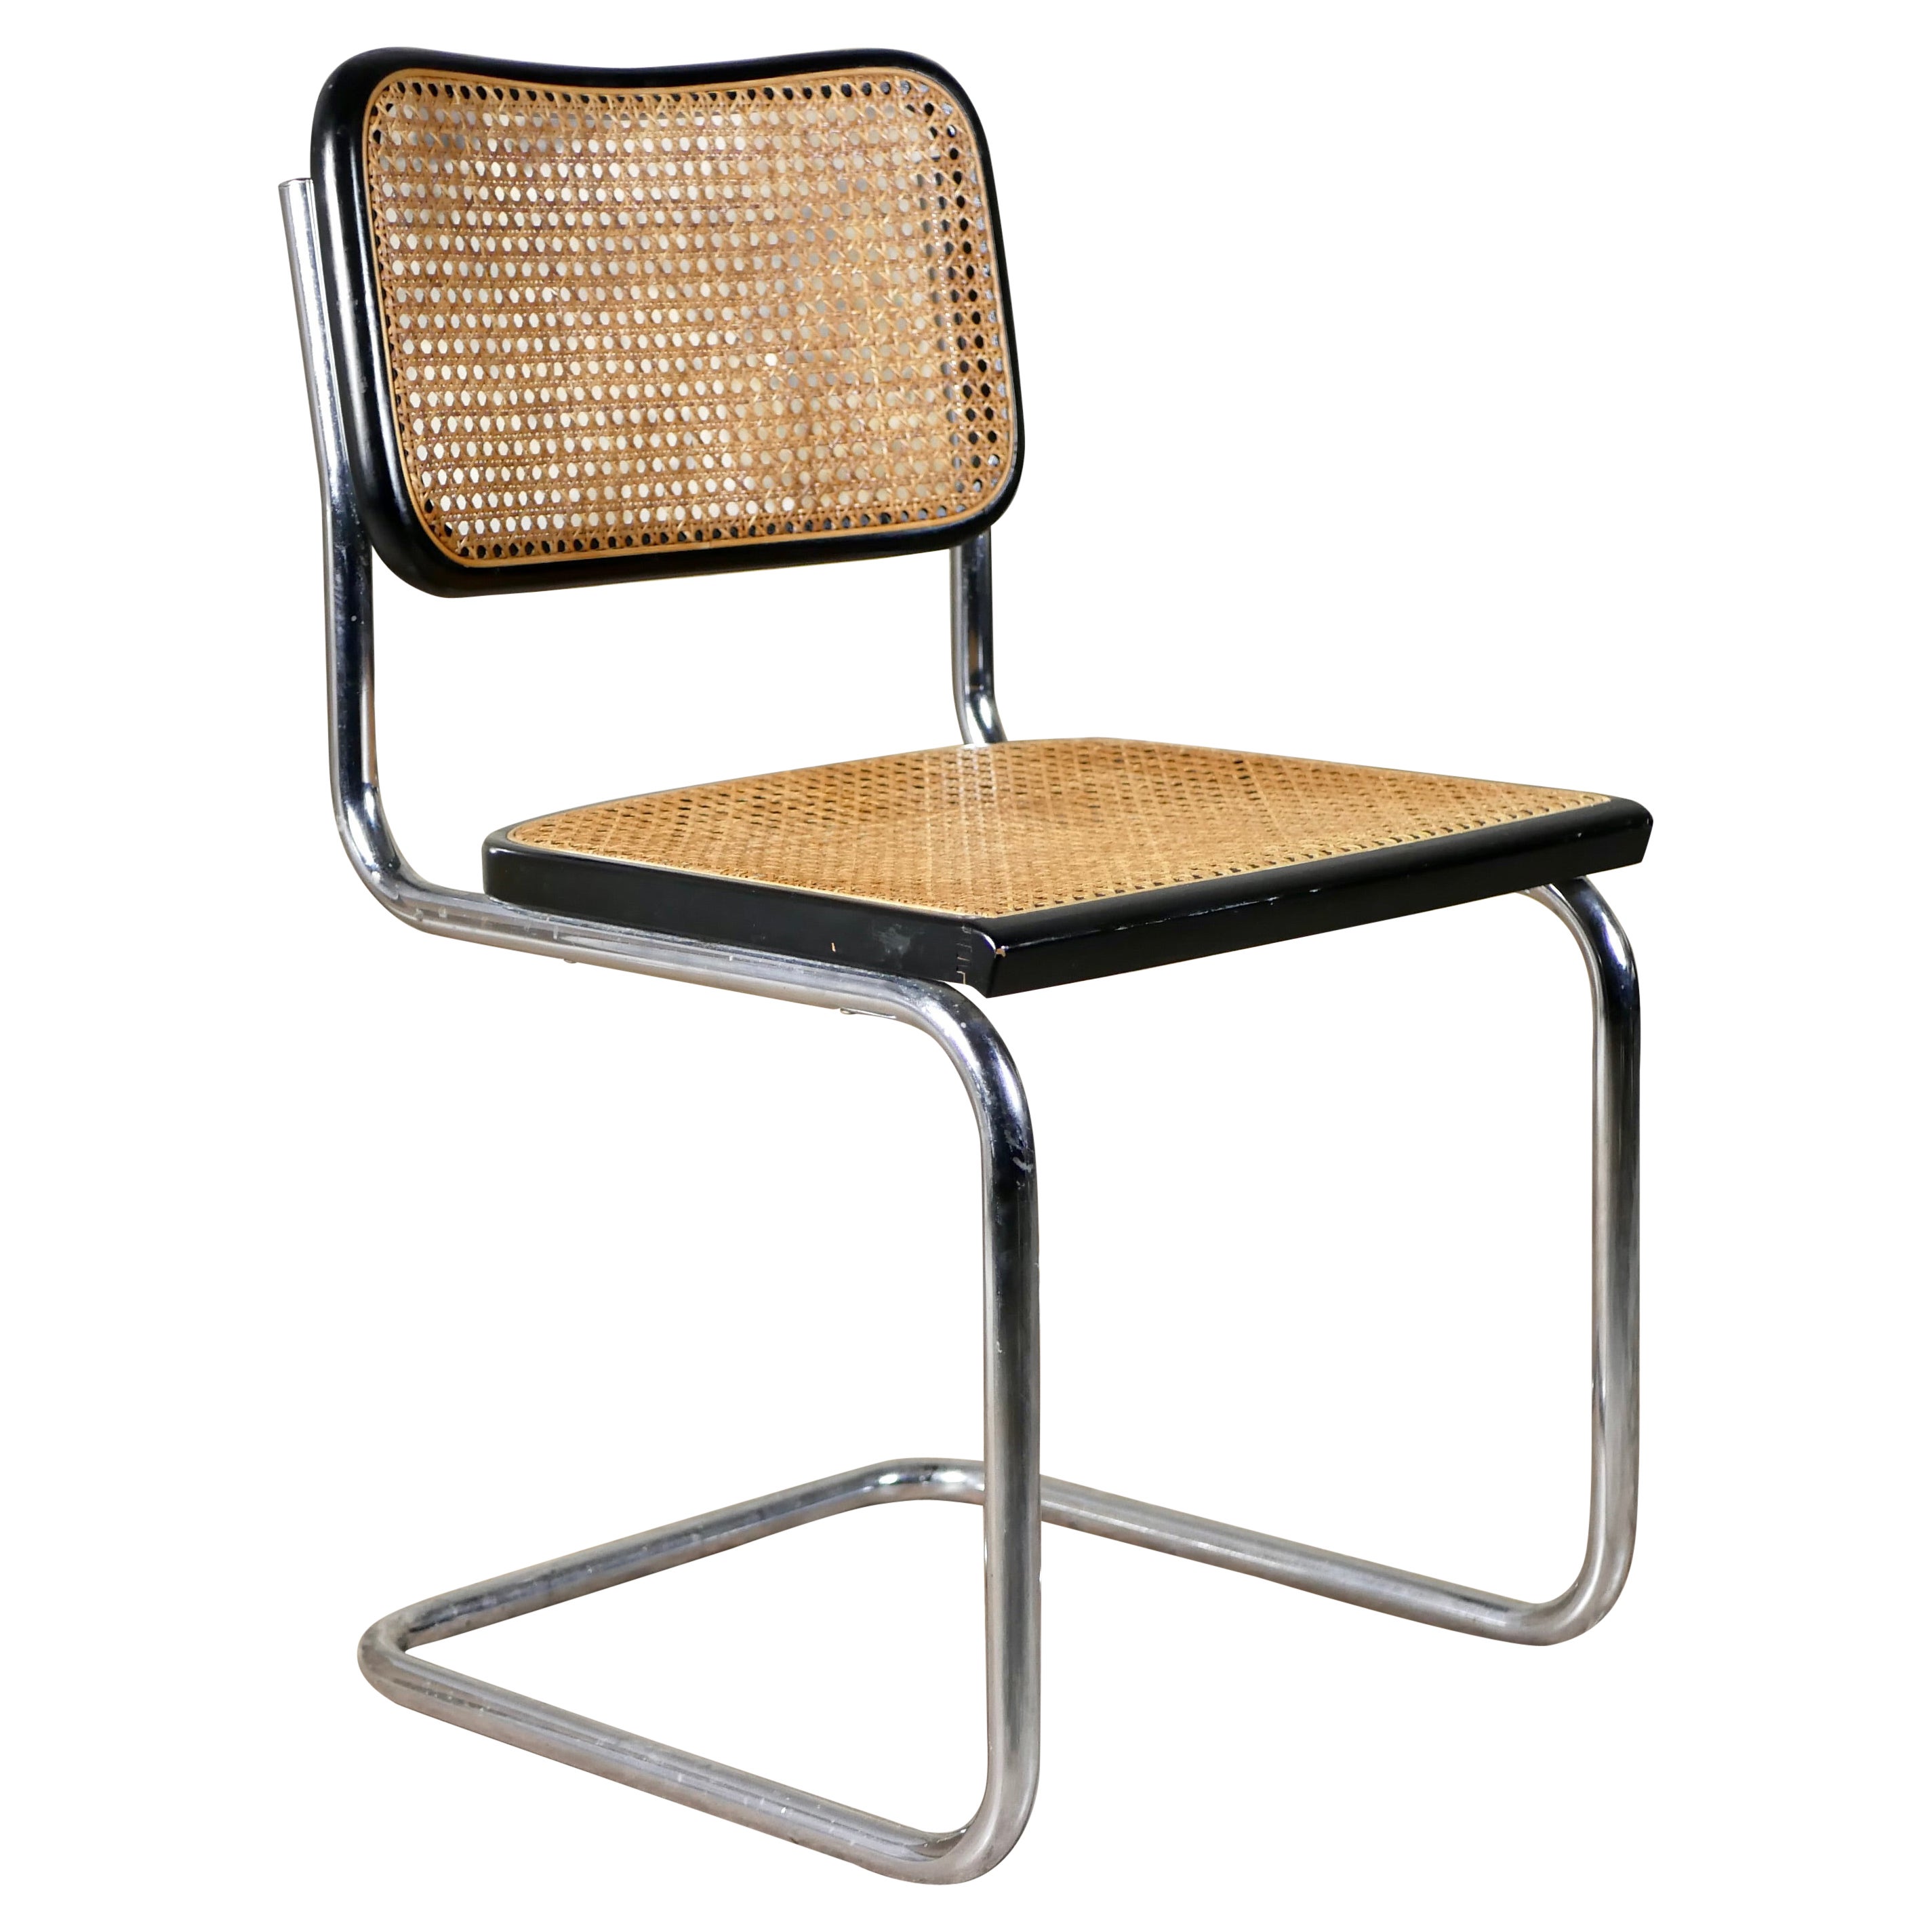 Cesca chair designed by Marcel Breuer, made in Italy, 1970